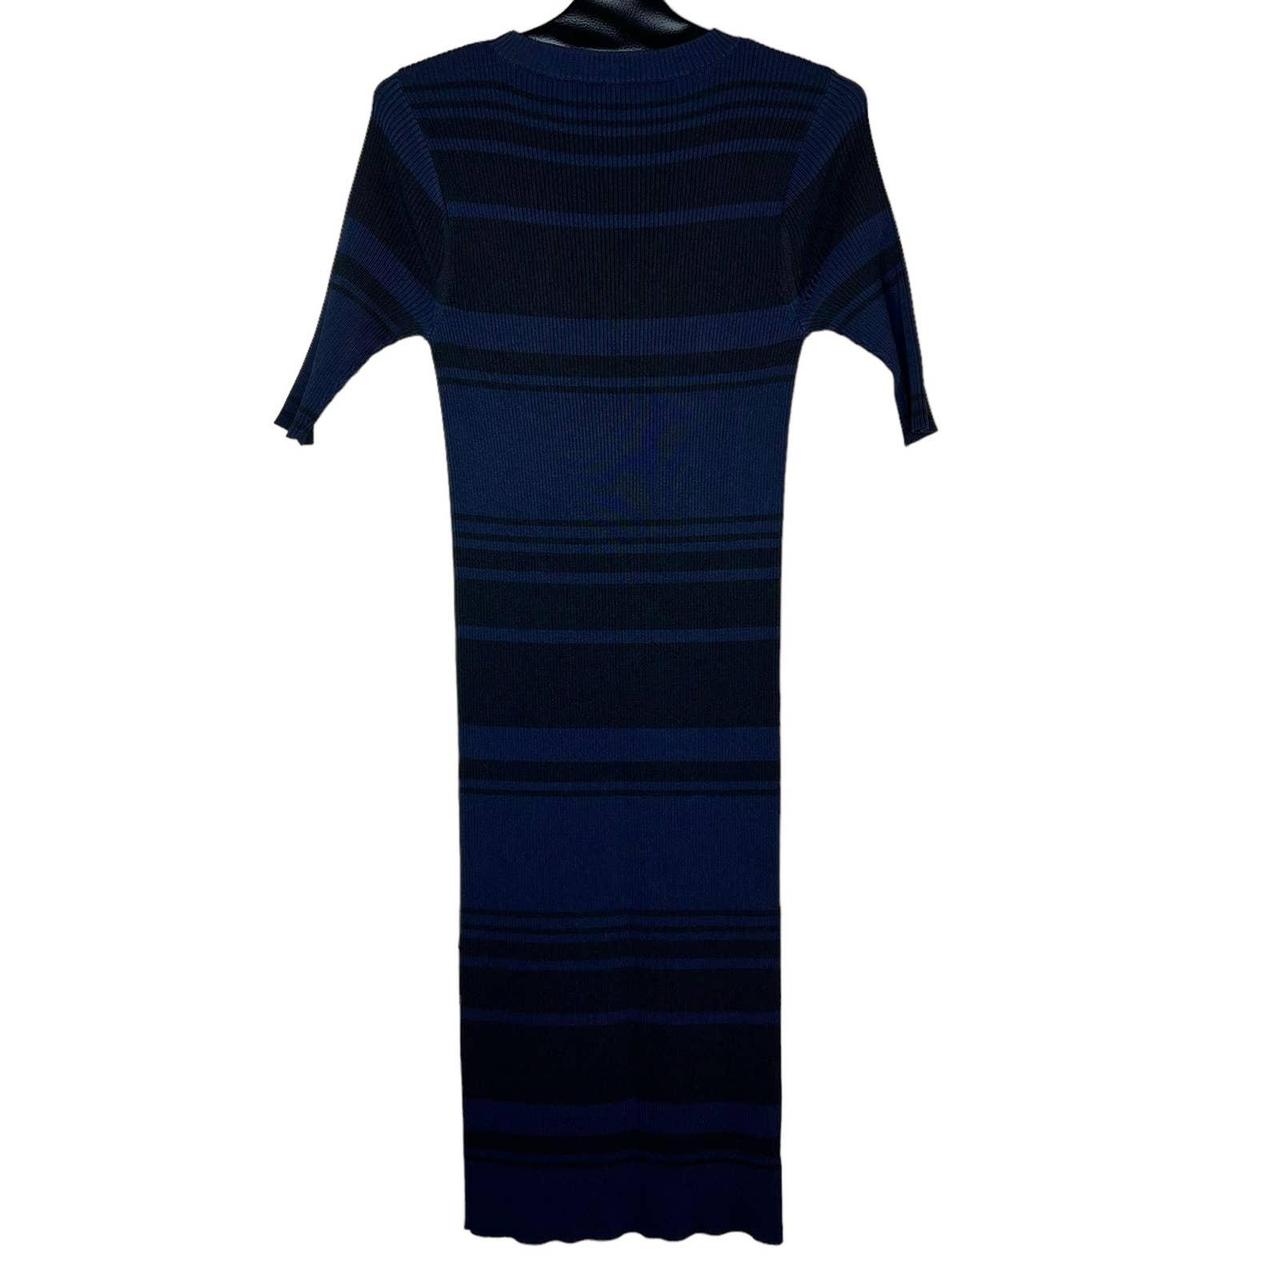 Country Road Women's Blue and Black Dress (2)